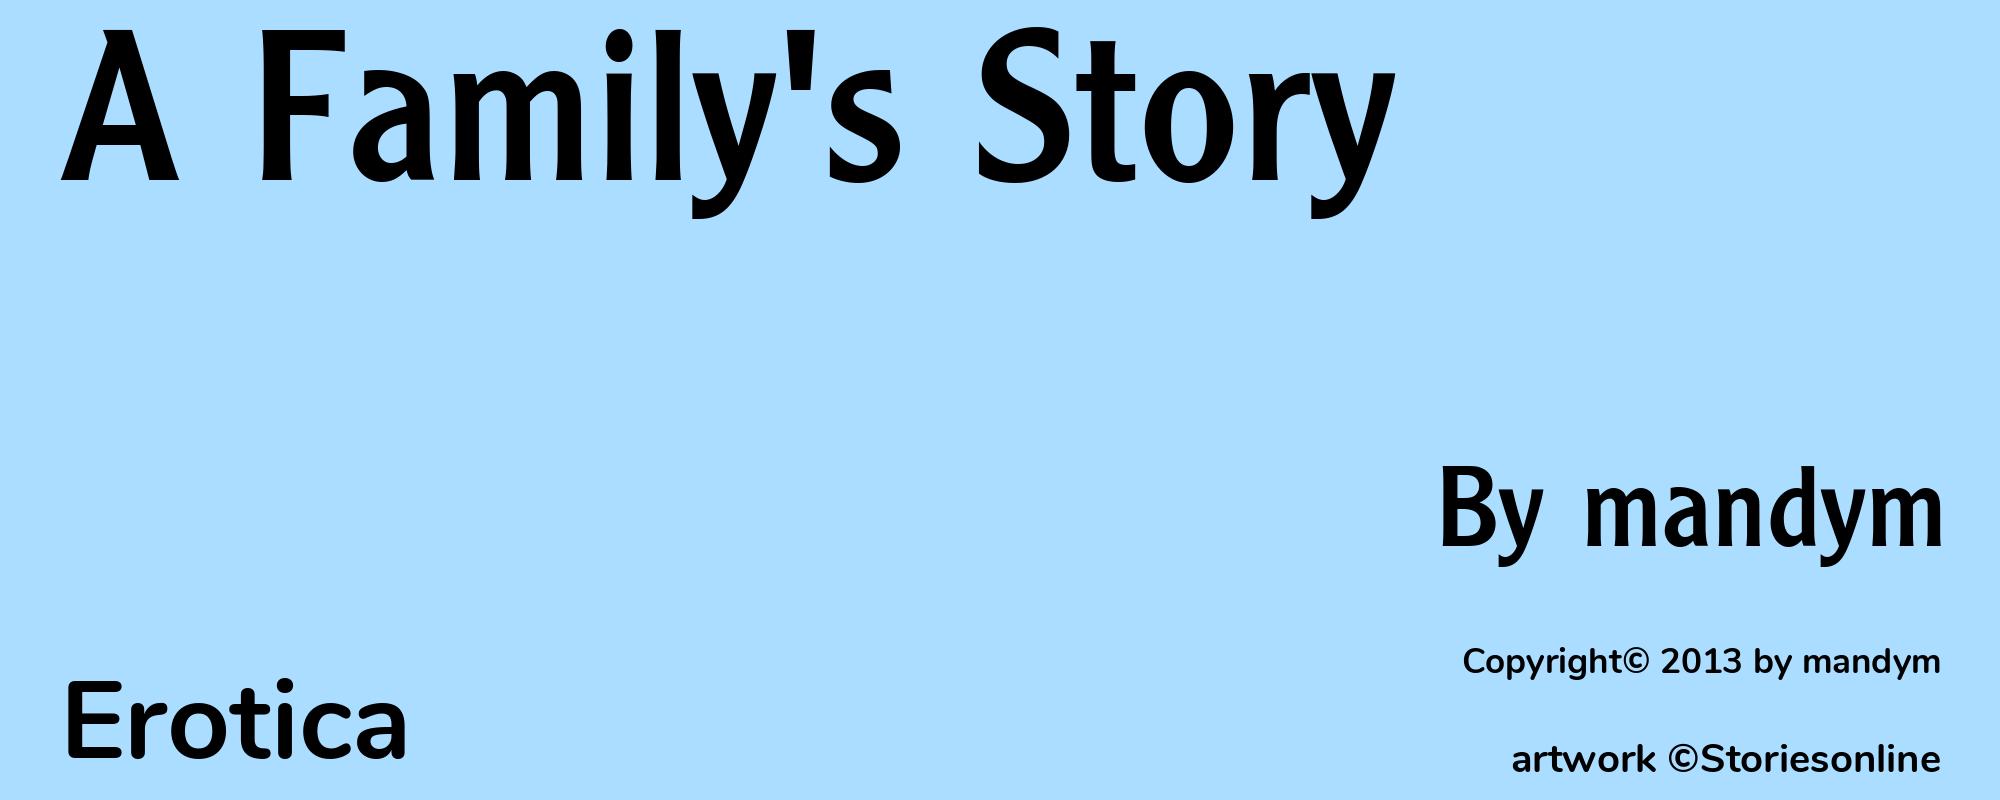 A Family's Story - Cover